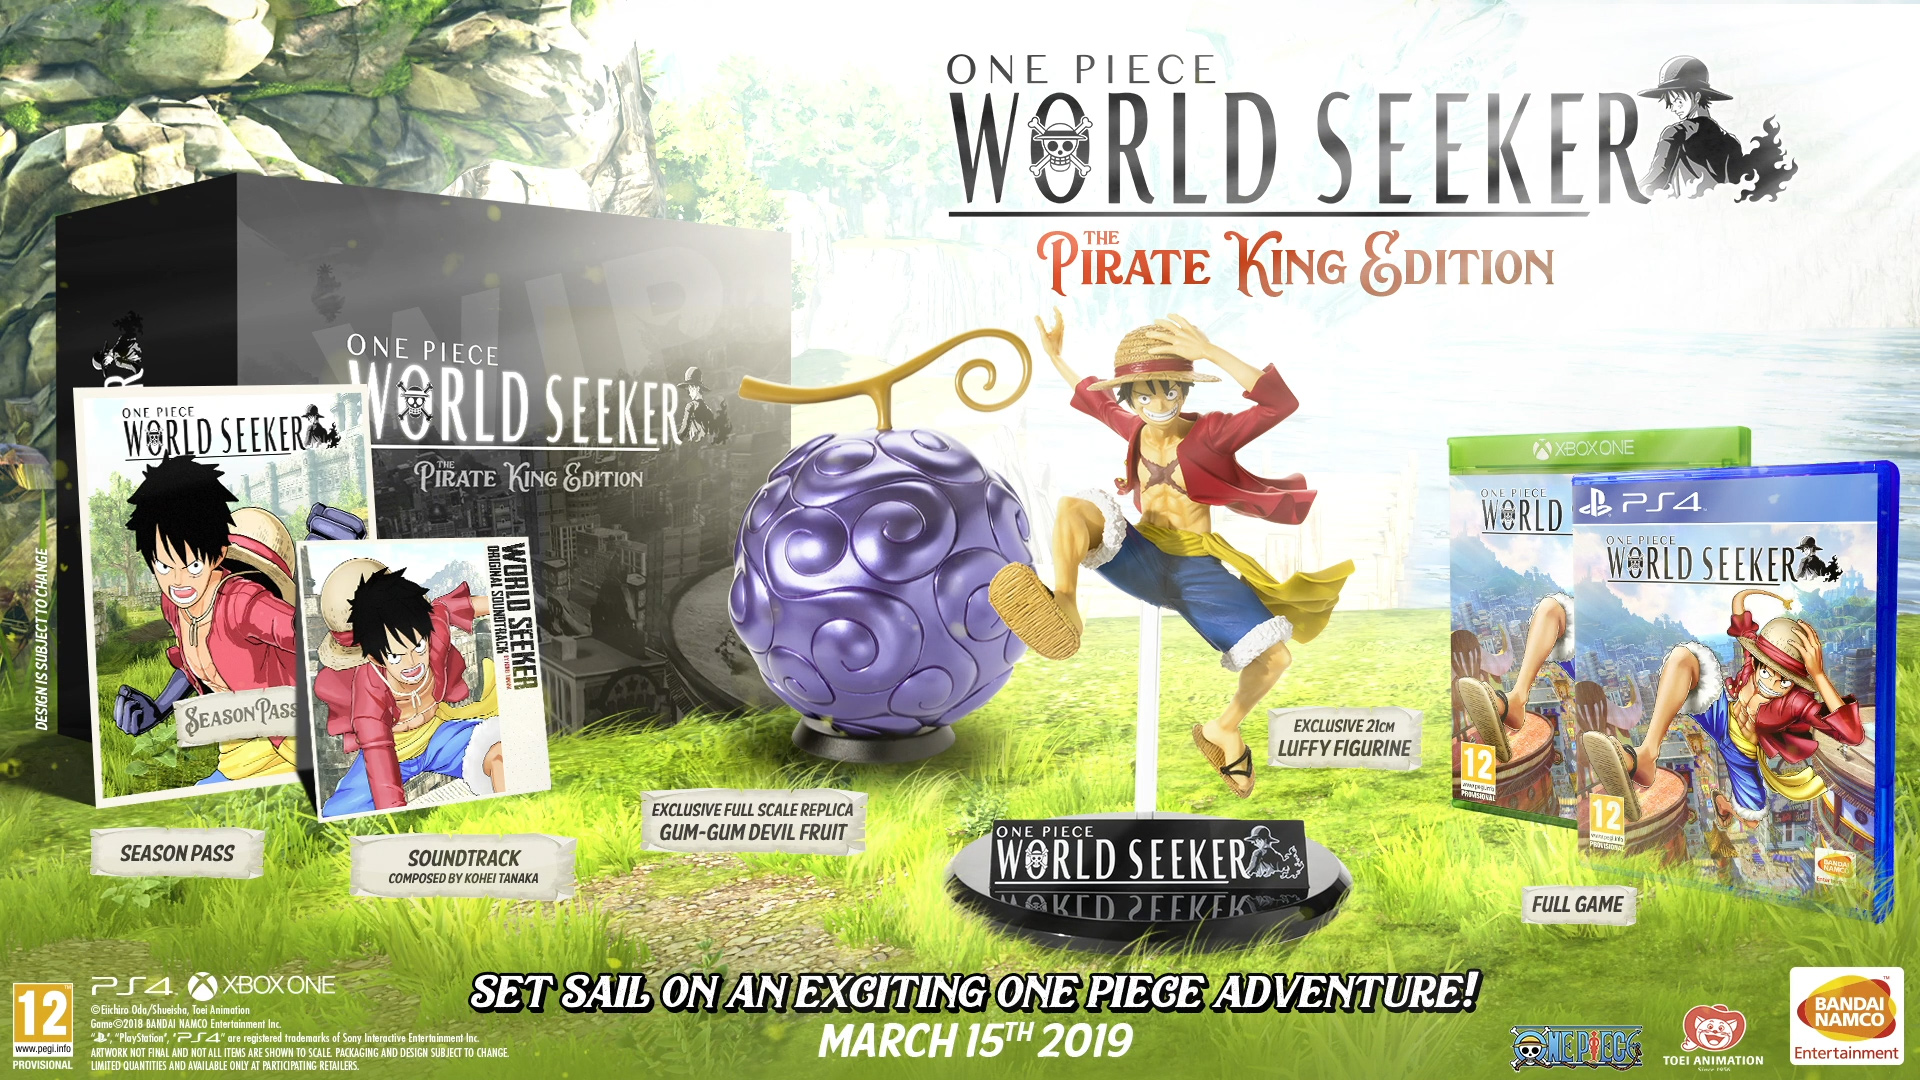 One Piece World Seeker The Pirate King Edition Legendary